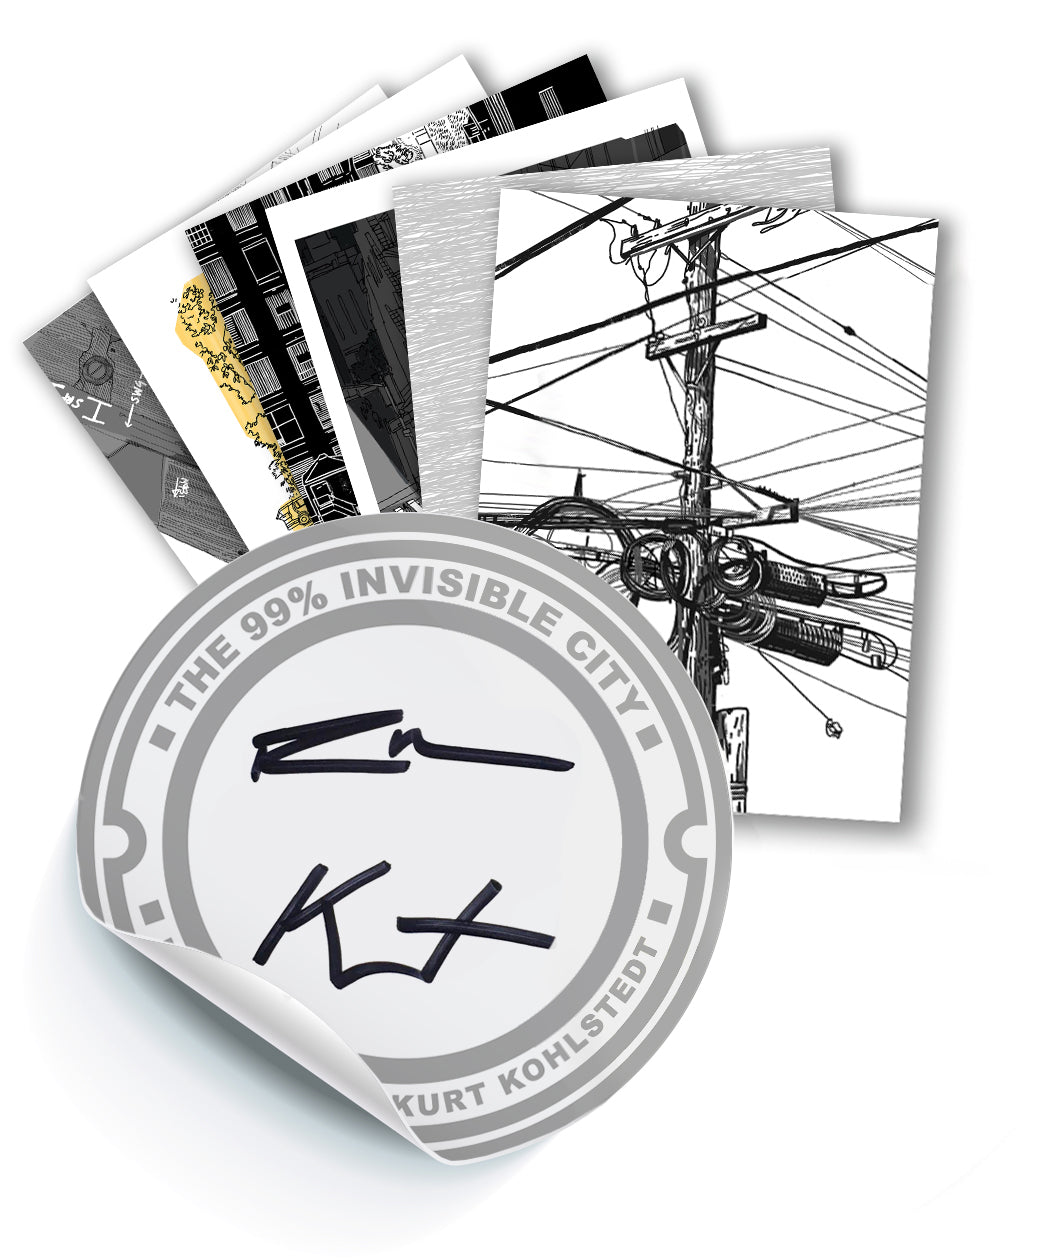 Signed white and gray circular book plate sticker and a stack of 7 postcards by 99% Invisible